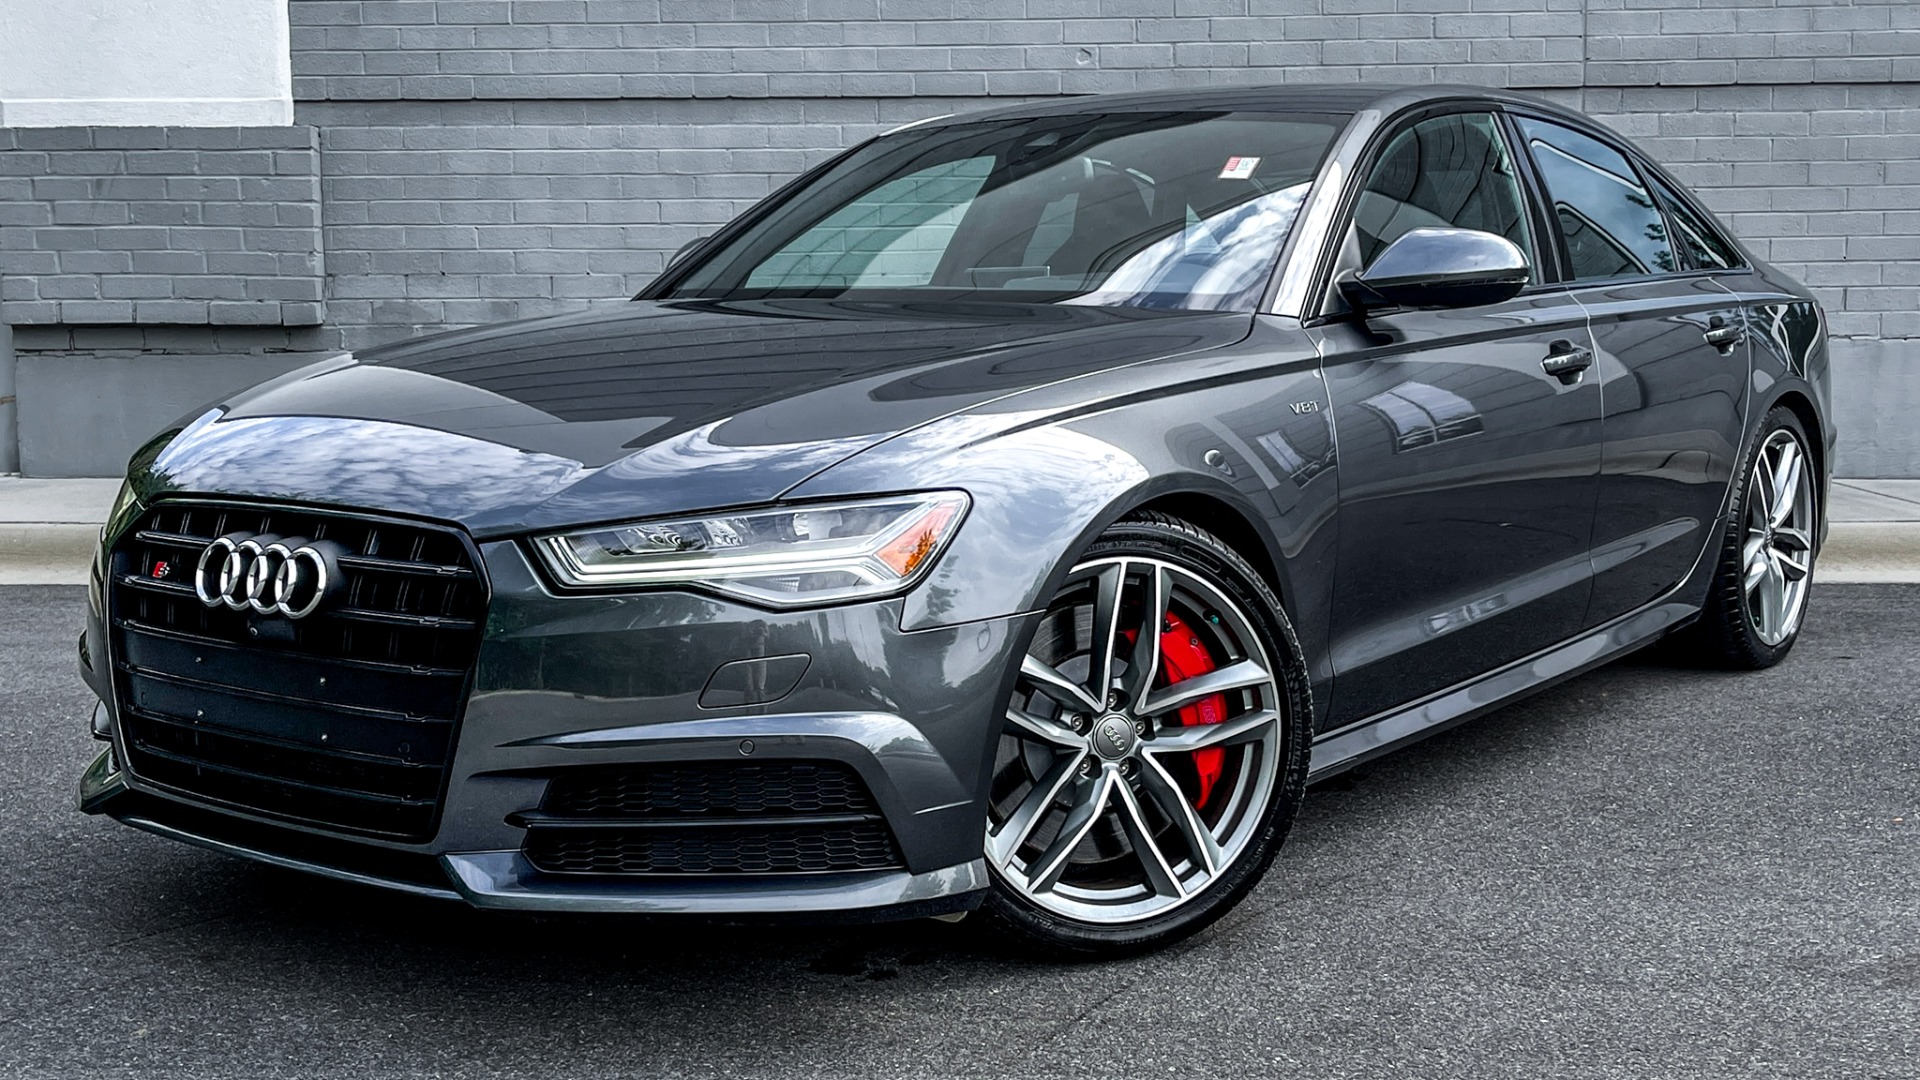 Used 2018 Audi S6 PRESTIGE / S SPORT / BLACK OPTIC / 4.0L V8 TURBO / COLD WEATHER PACKAGE for sale Sold at Formula Imports in Charlotte NC 28227 1